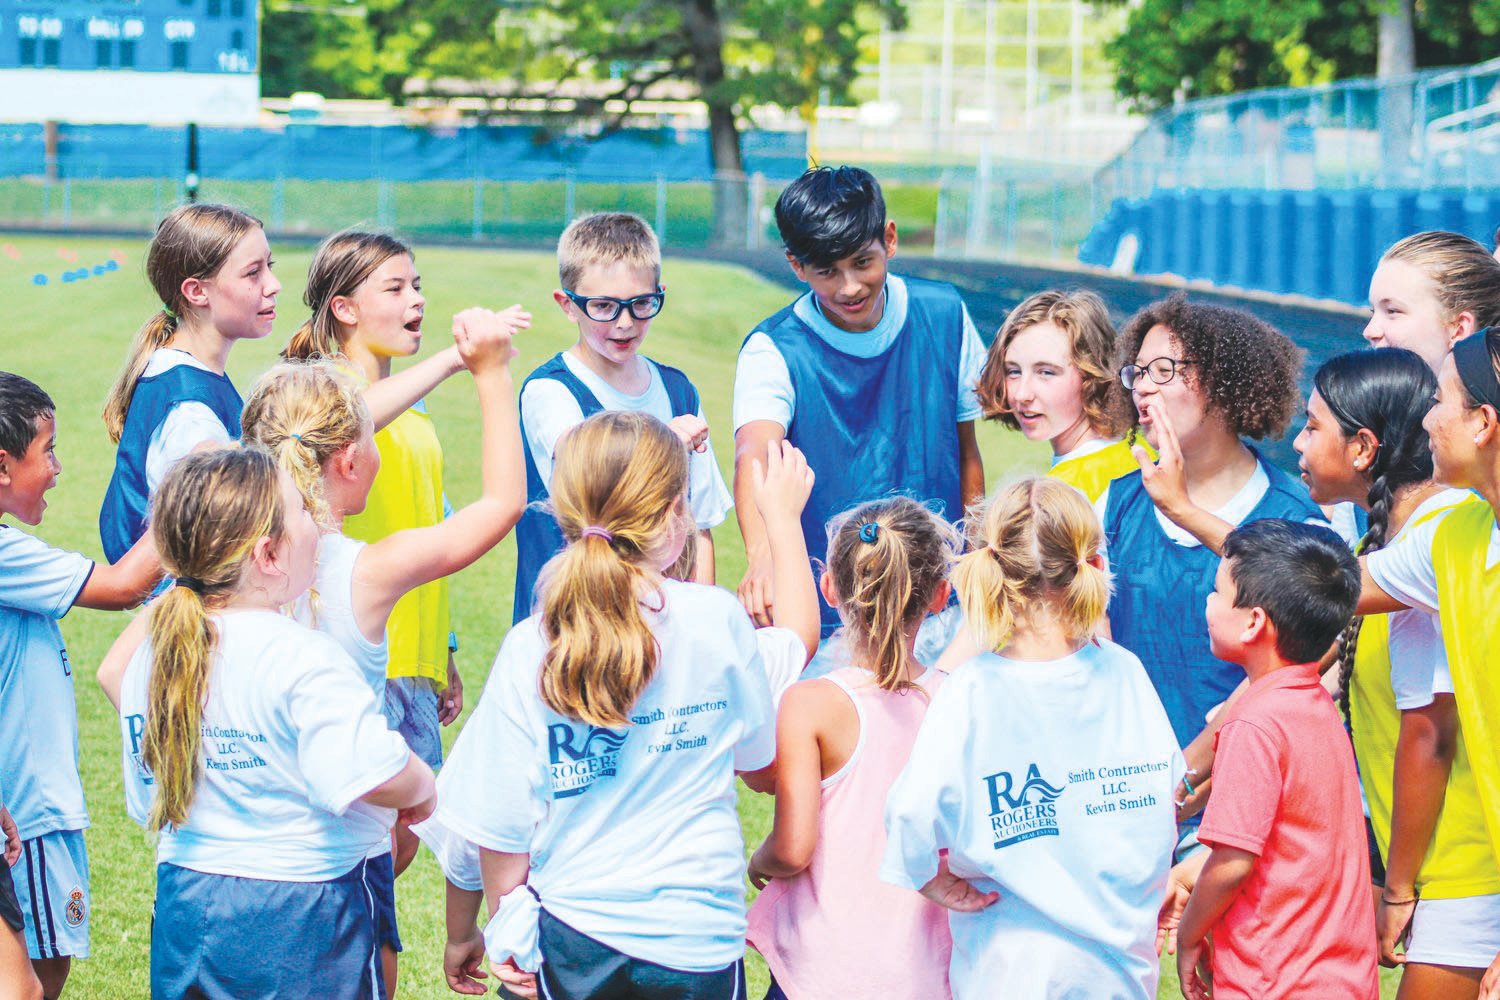 A group of campers at Jordan-Matthews' youth soccer camp – including counselor and J-M soccer player Carlos Rojas (top center, in blue) — recite a chant about popsicles on the final day of camp on July 1, 2021. This was the first-ever youth soccer camp hosted by the Jets.